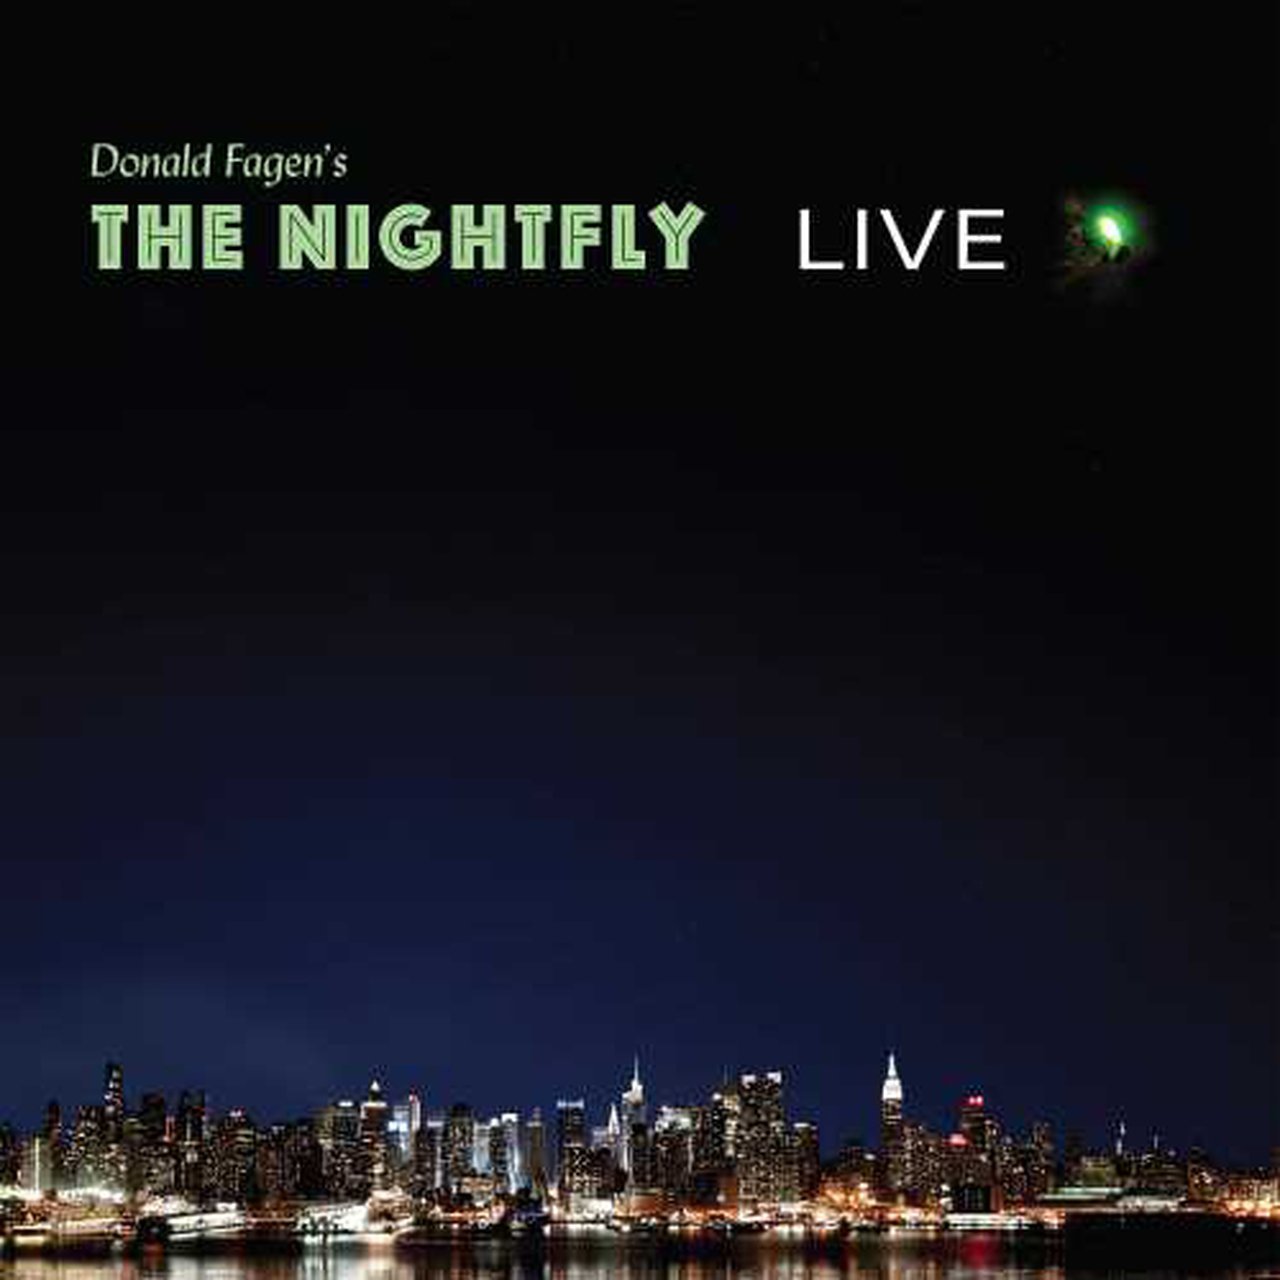 DONALD FAGEN'S THE NIGHTFLY LIVE